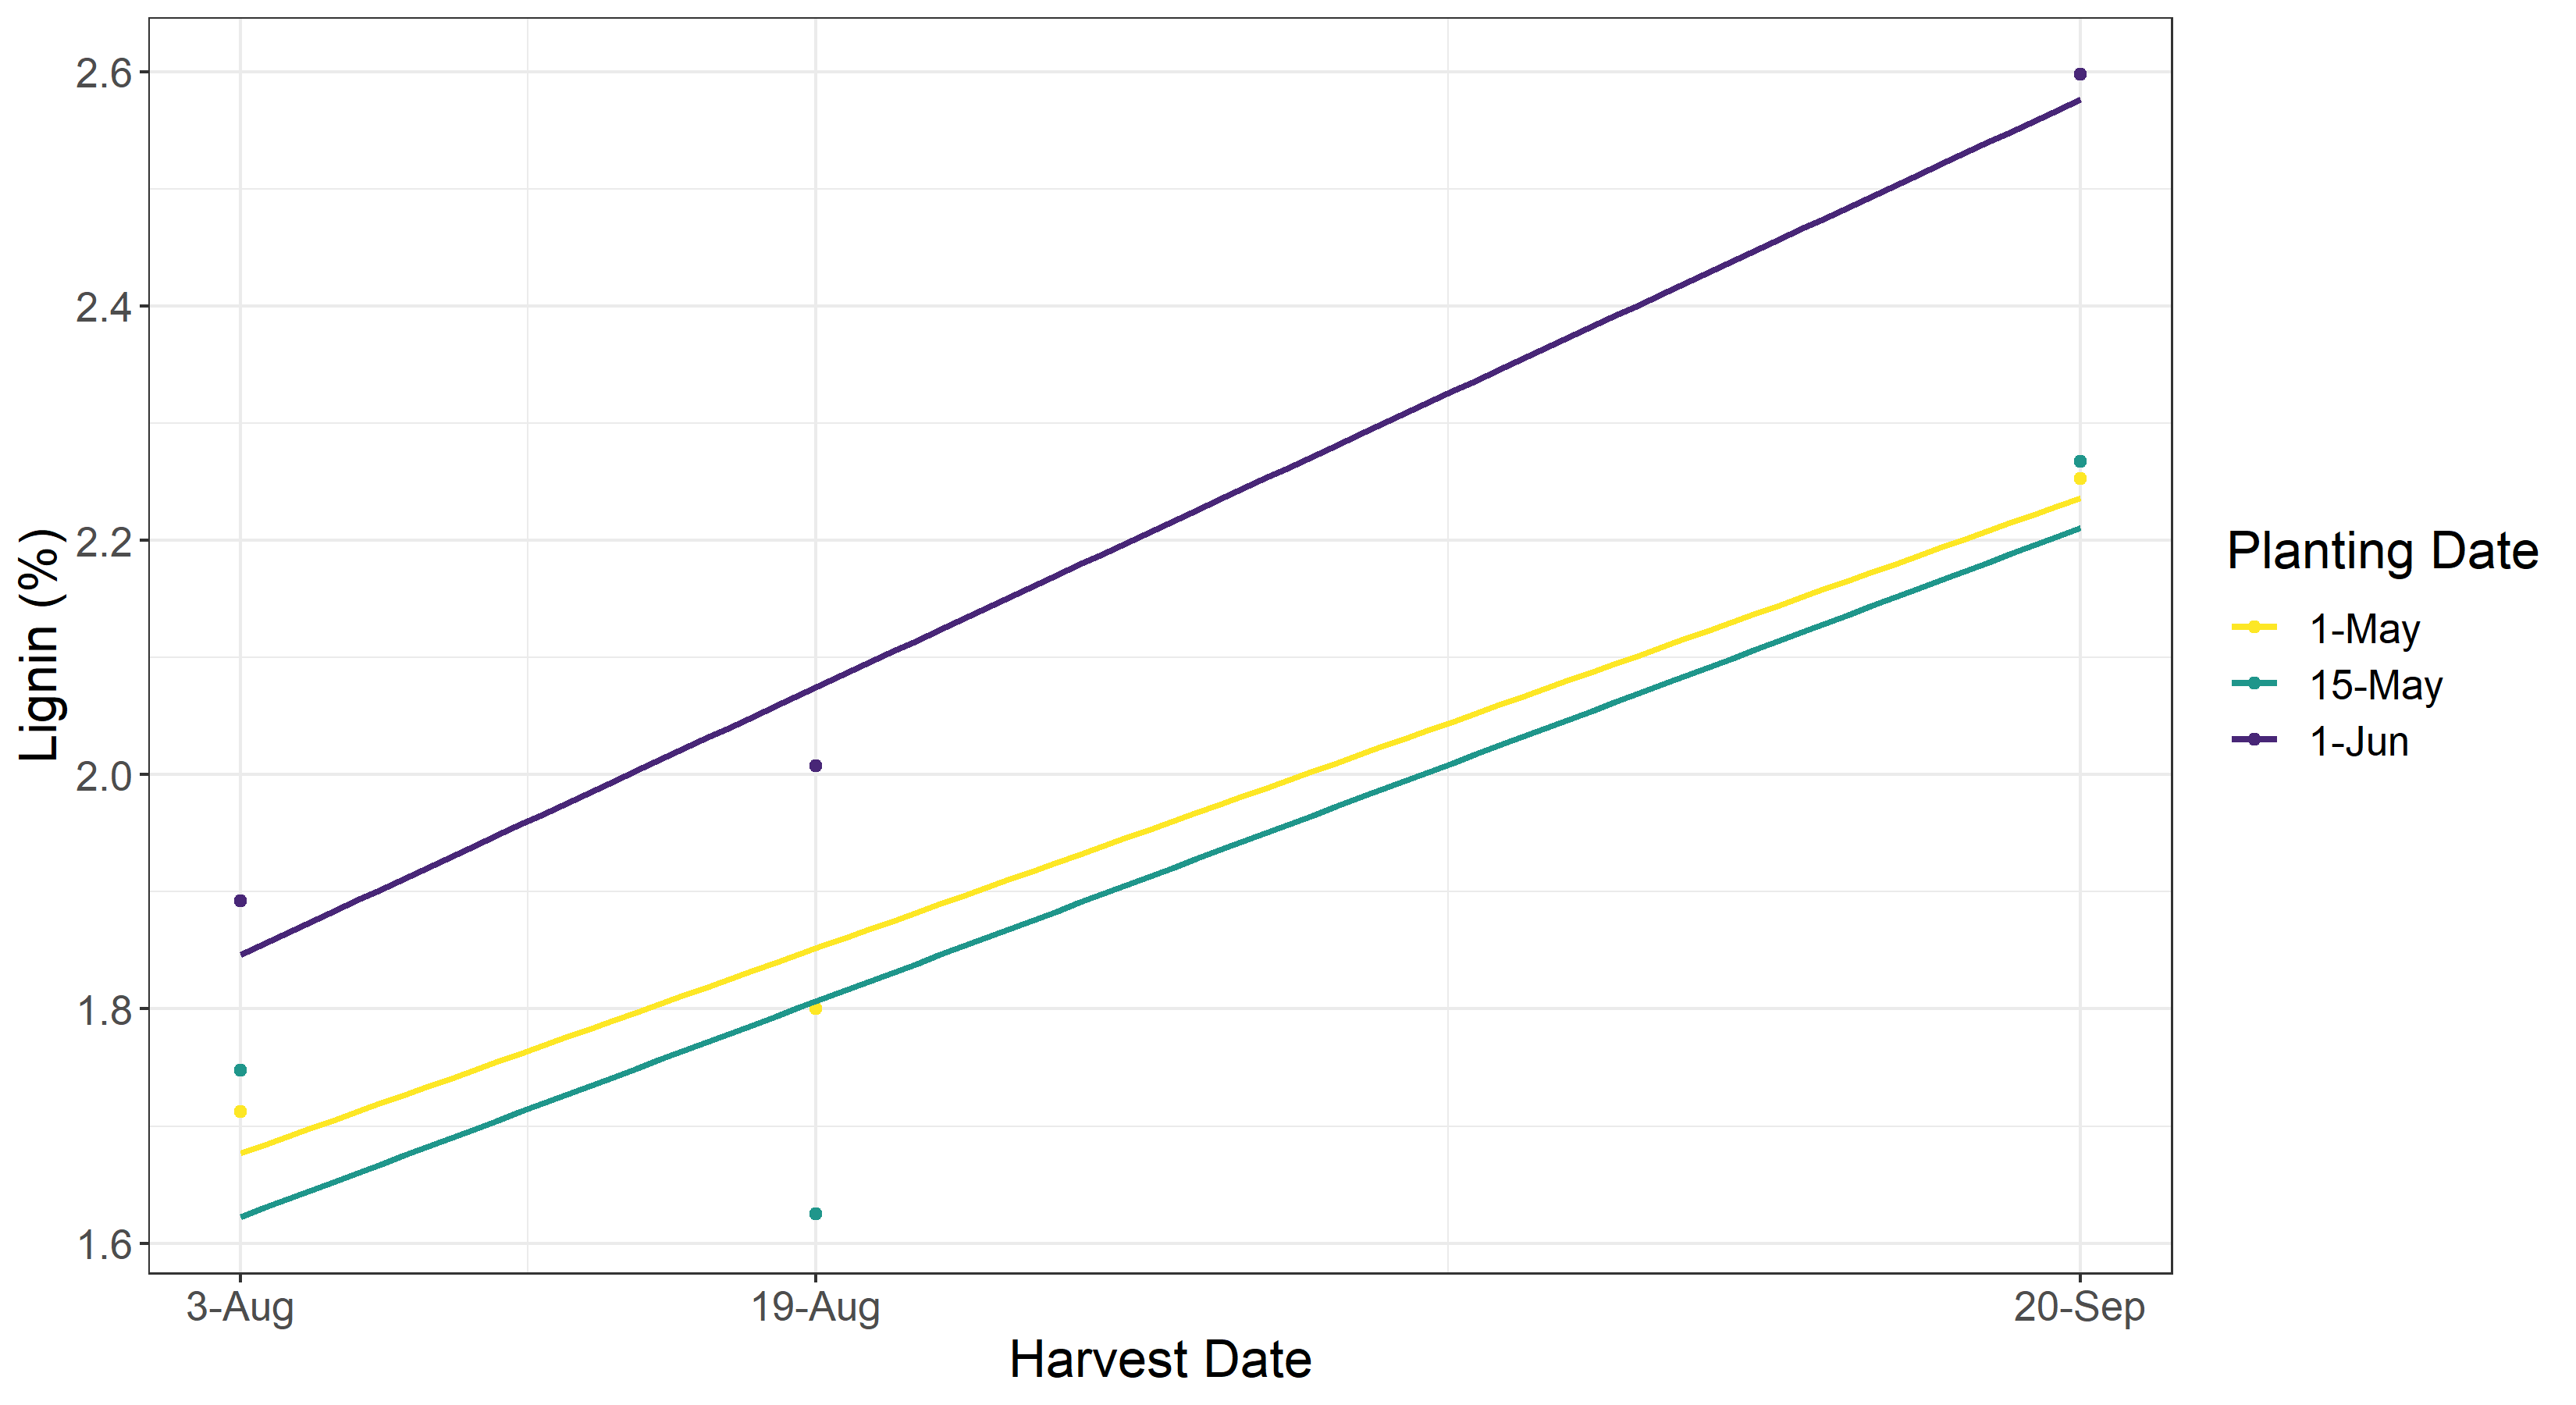 Linear model showing the lignin concentration based on planting date over the harvest date